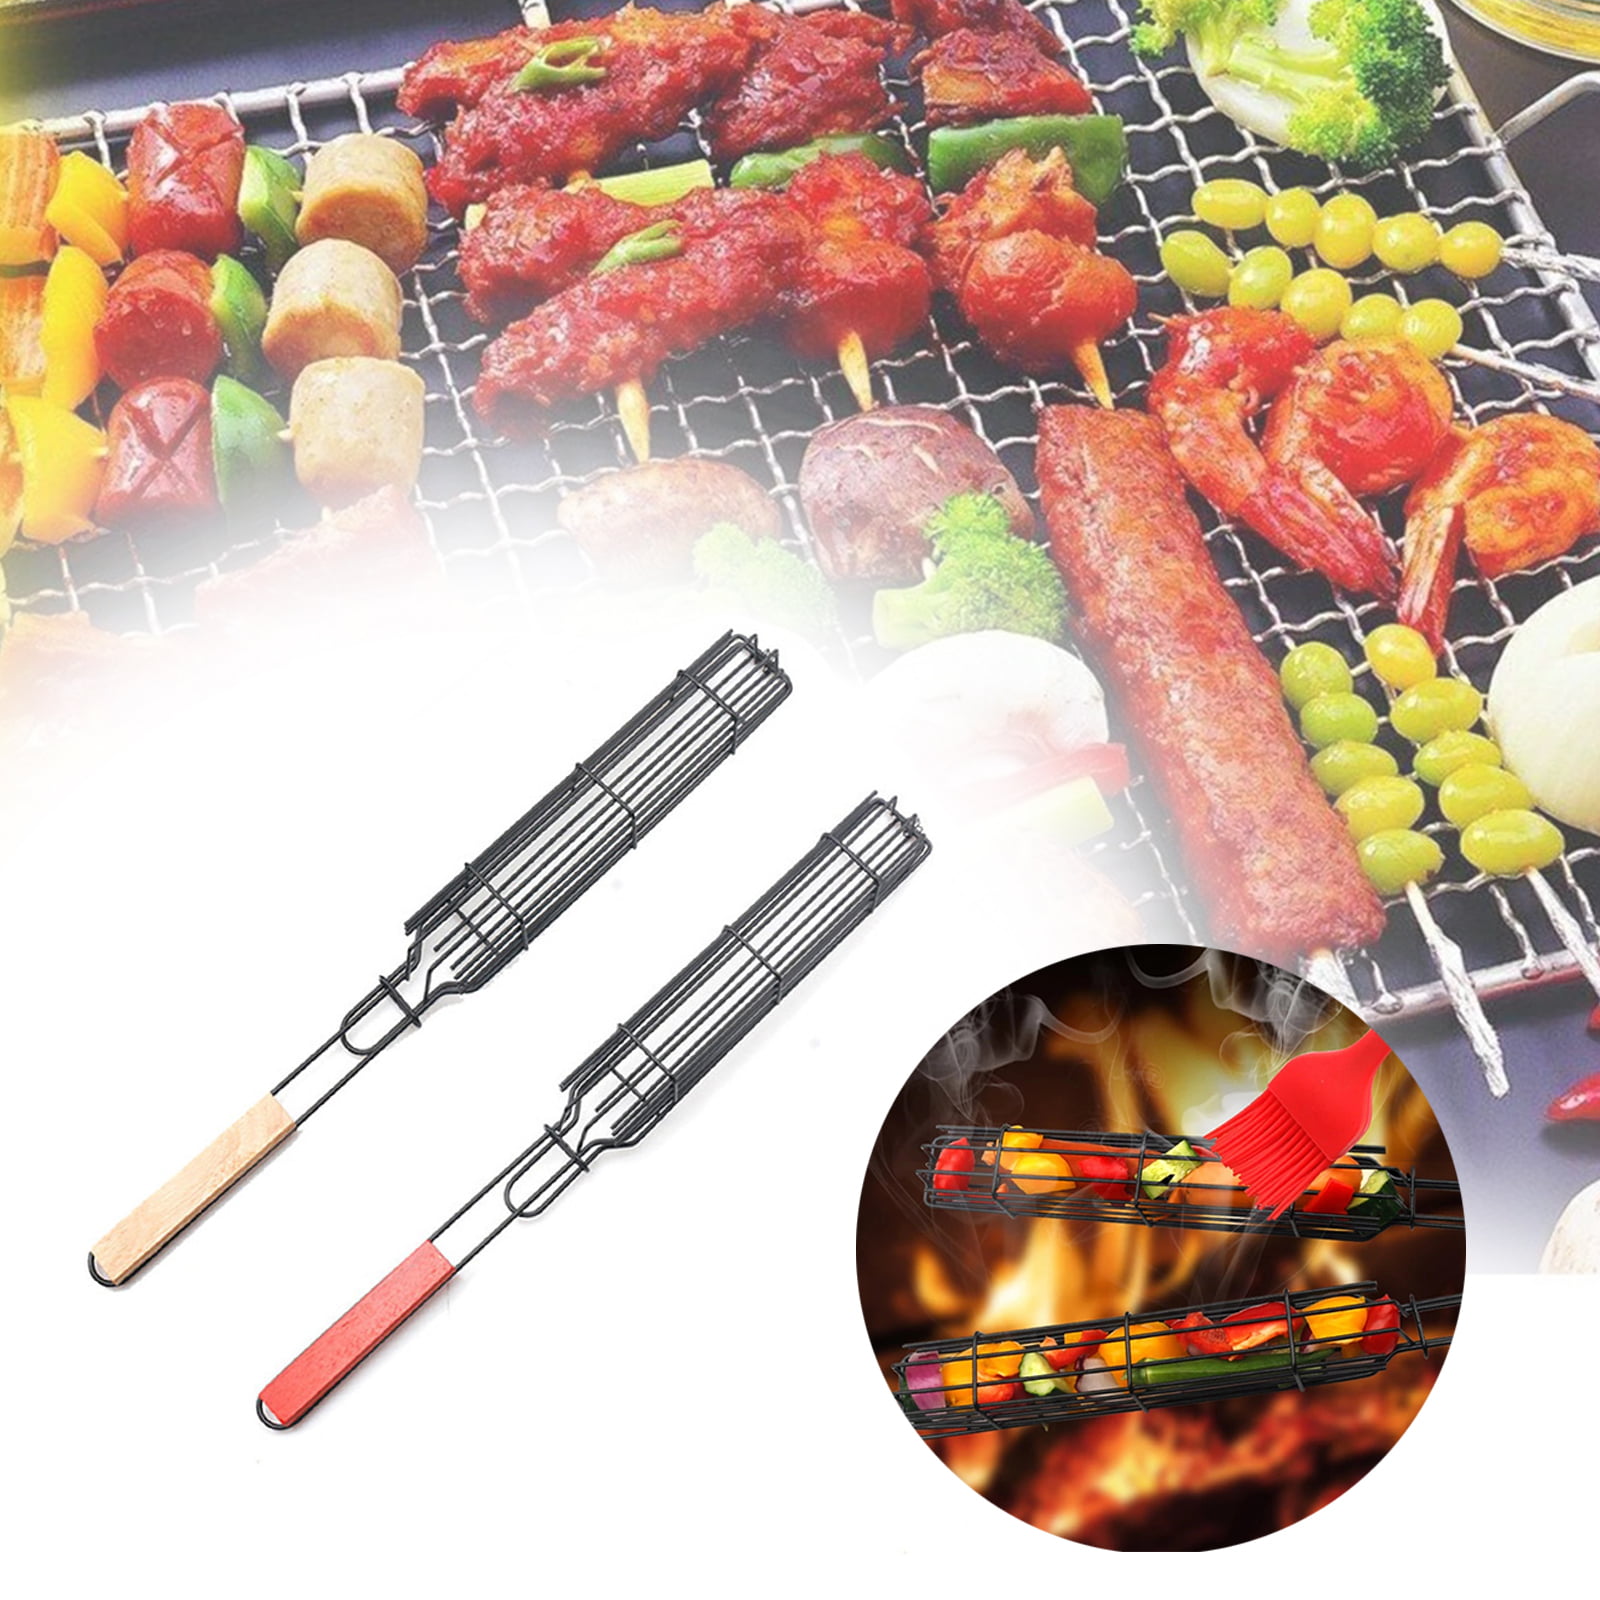 Details about   BBQ Grilling Tong Salad Bread Tong Non-Stick Barbecue Grilling Cooking Tong 